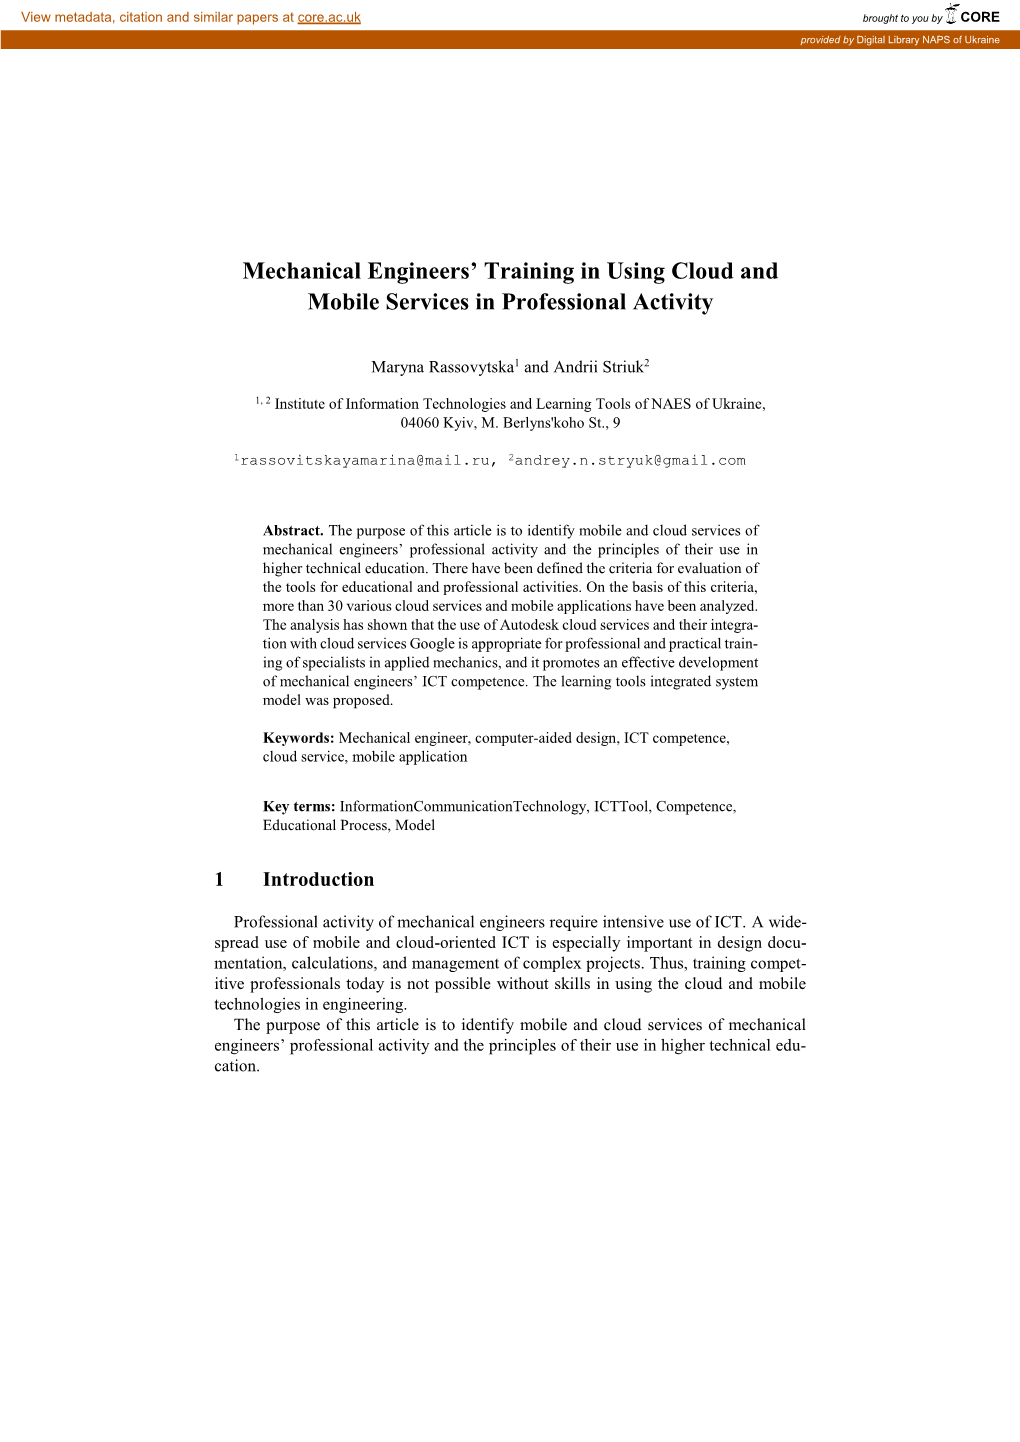 Mechanical Engineers' Training in Using Cloud and Mobile Services In